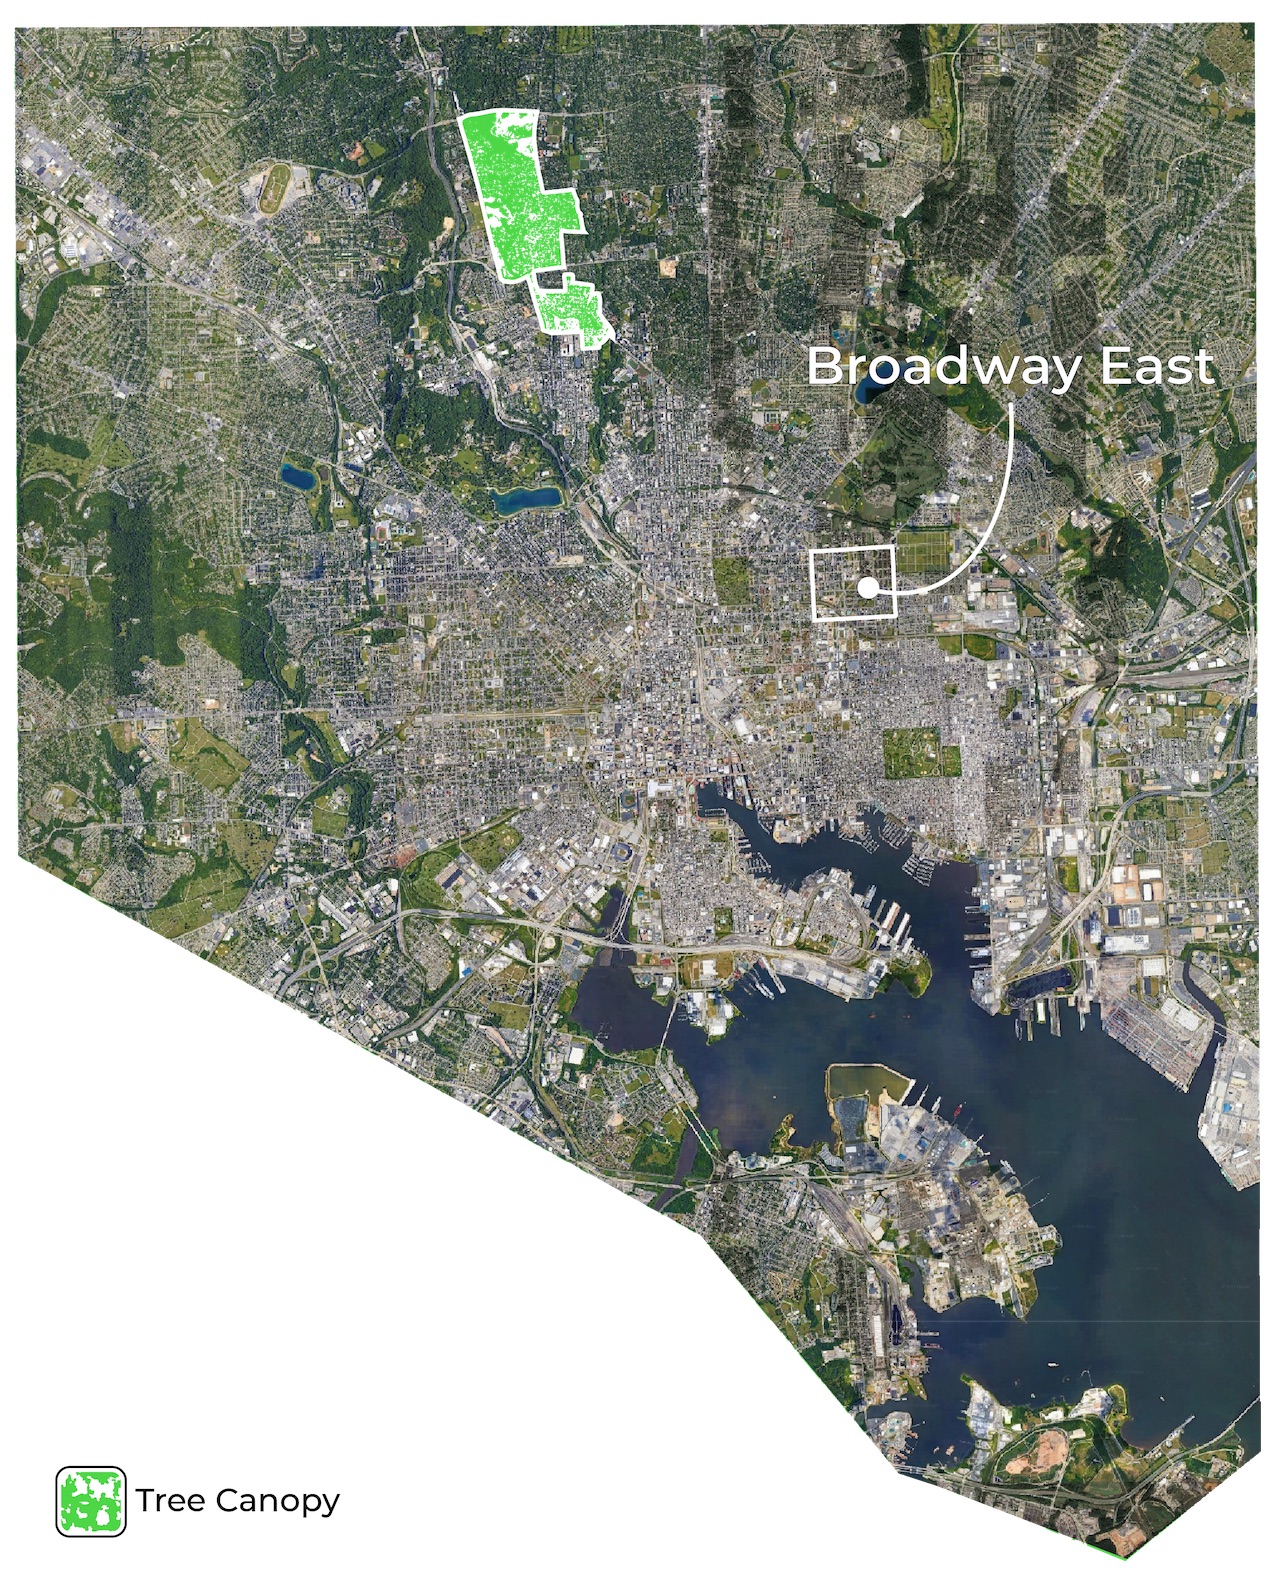 The map shows all of Baltimore, now with Broadway East labeled.